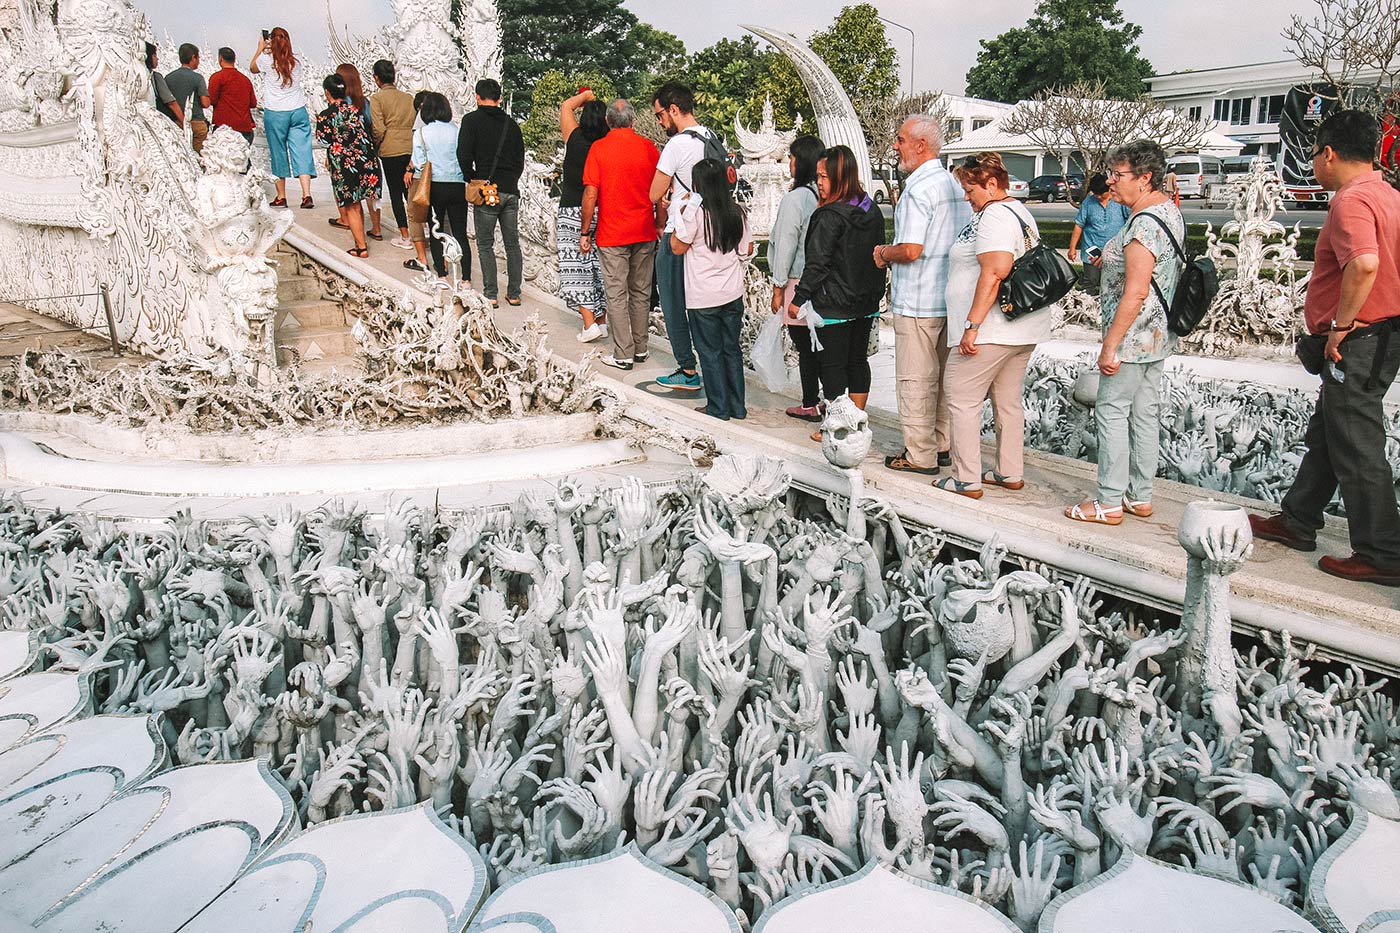 Visiting the White Temple / Wat Rong Khun in Chiang Rai, Thailand